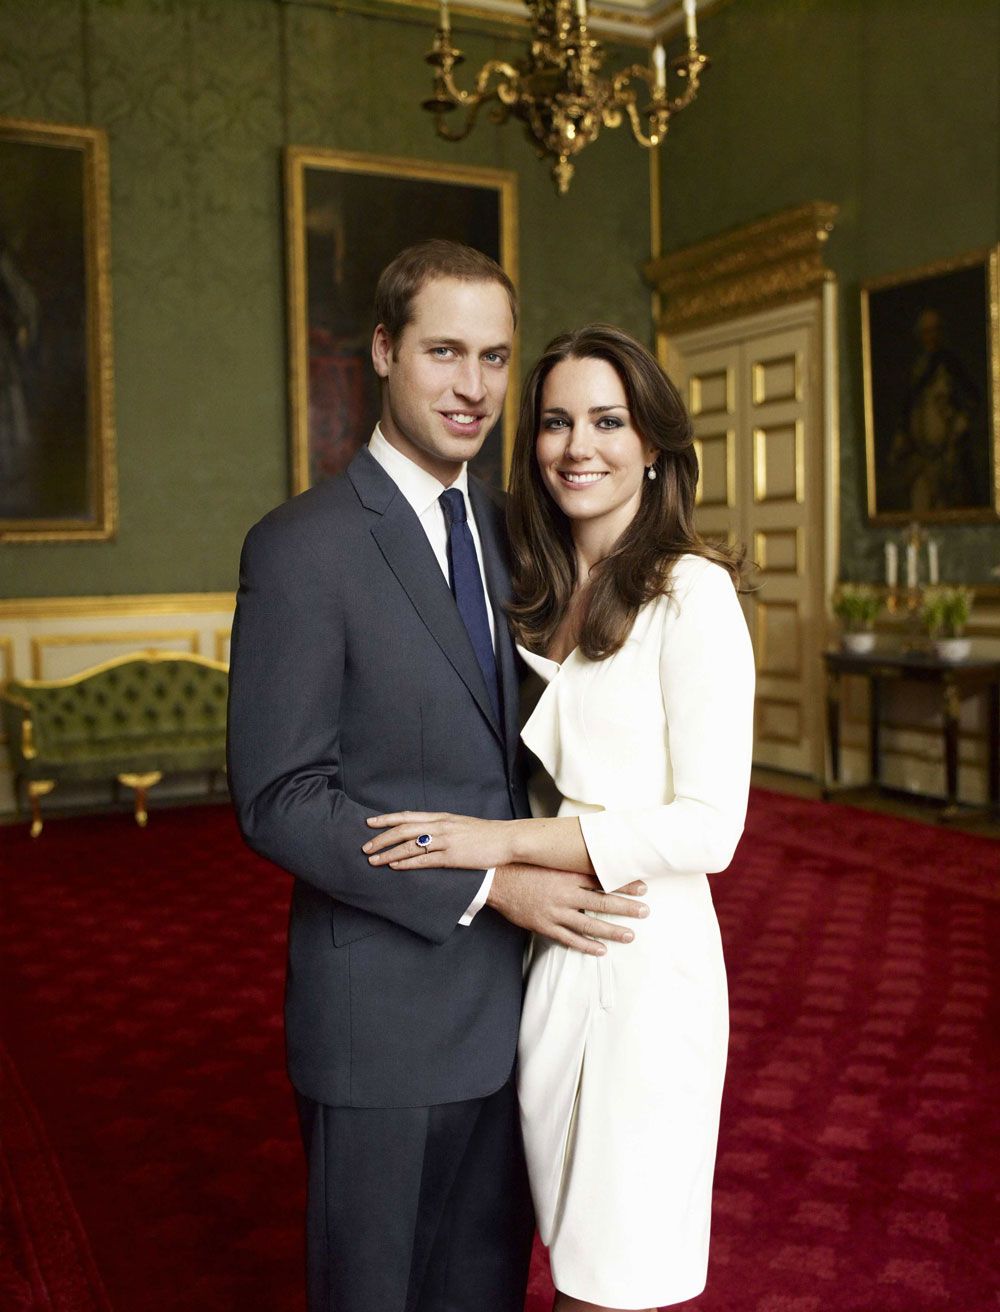 /assets/contentimages/Prince_William_and_Kate_Middleton.jpg